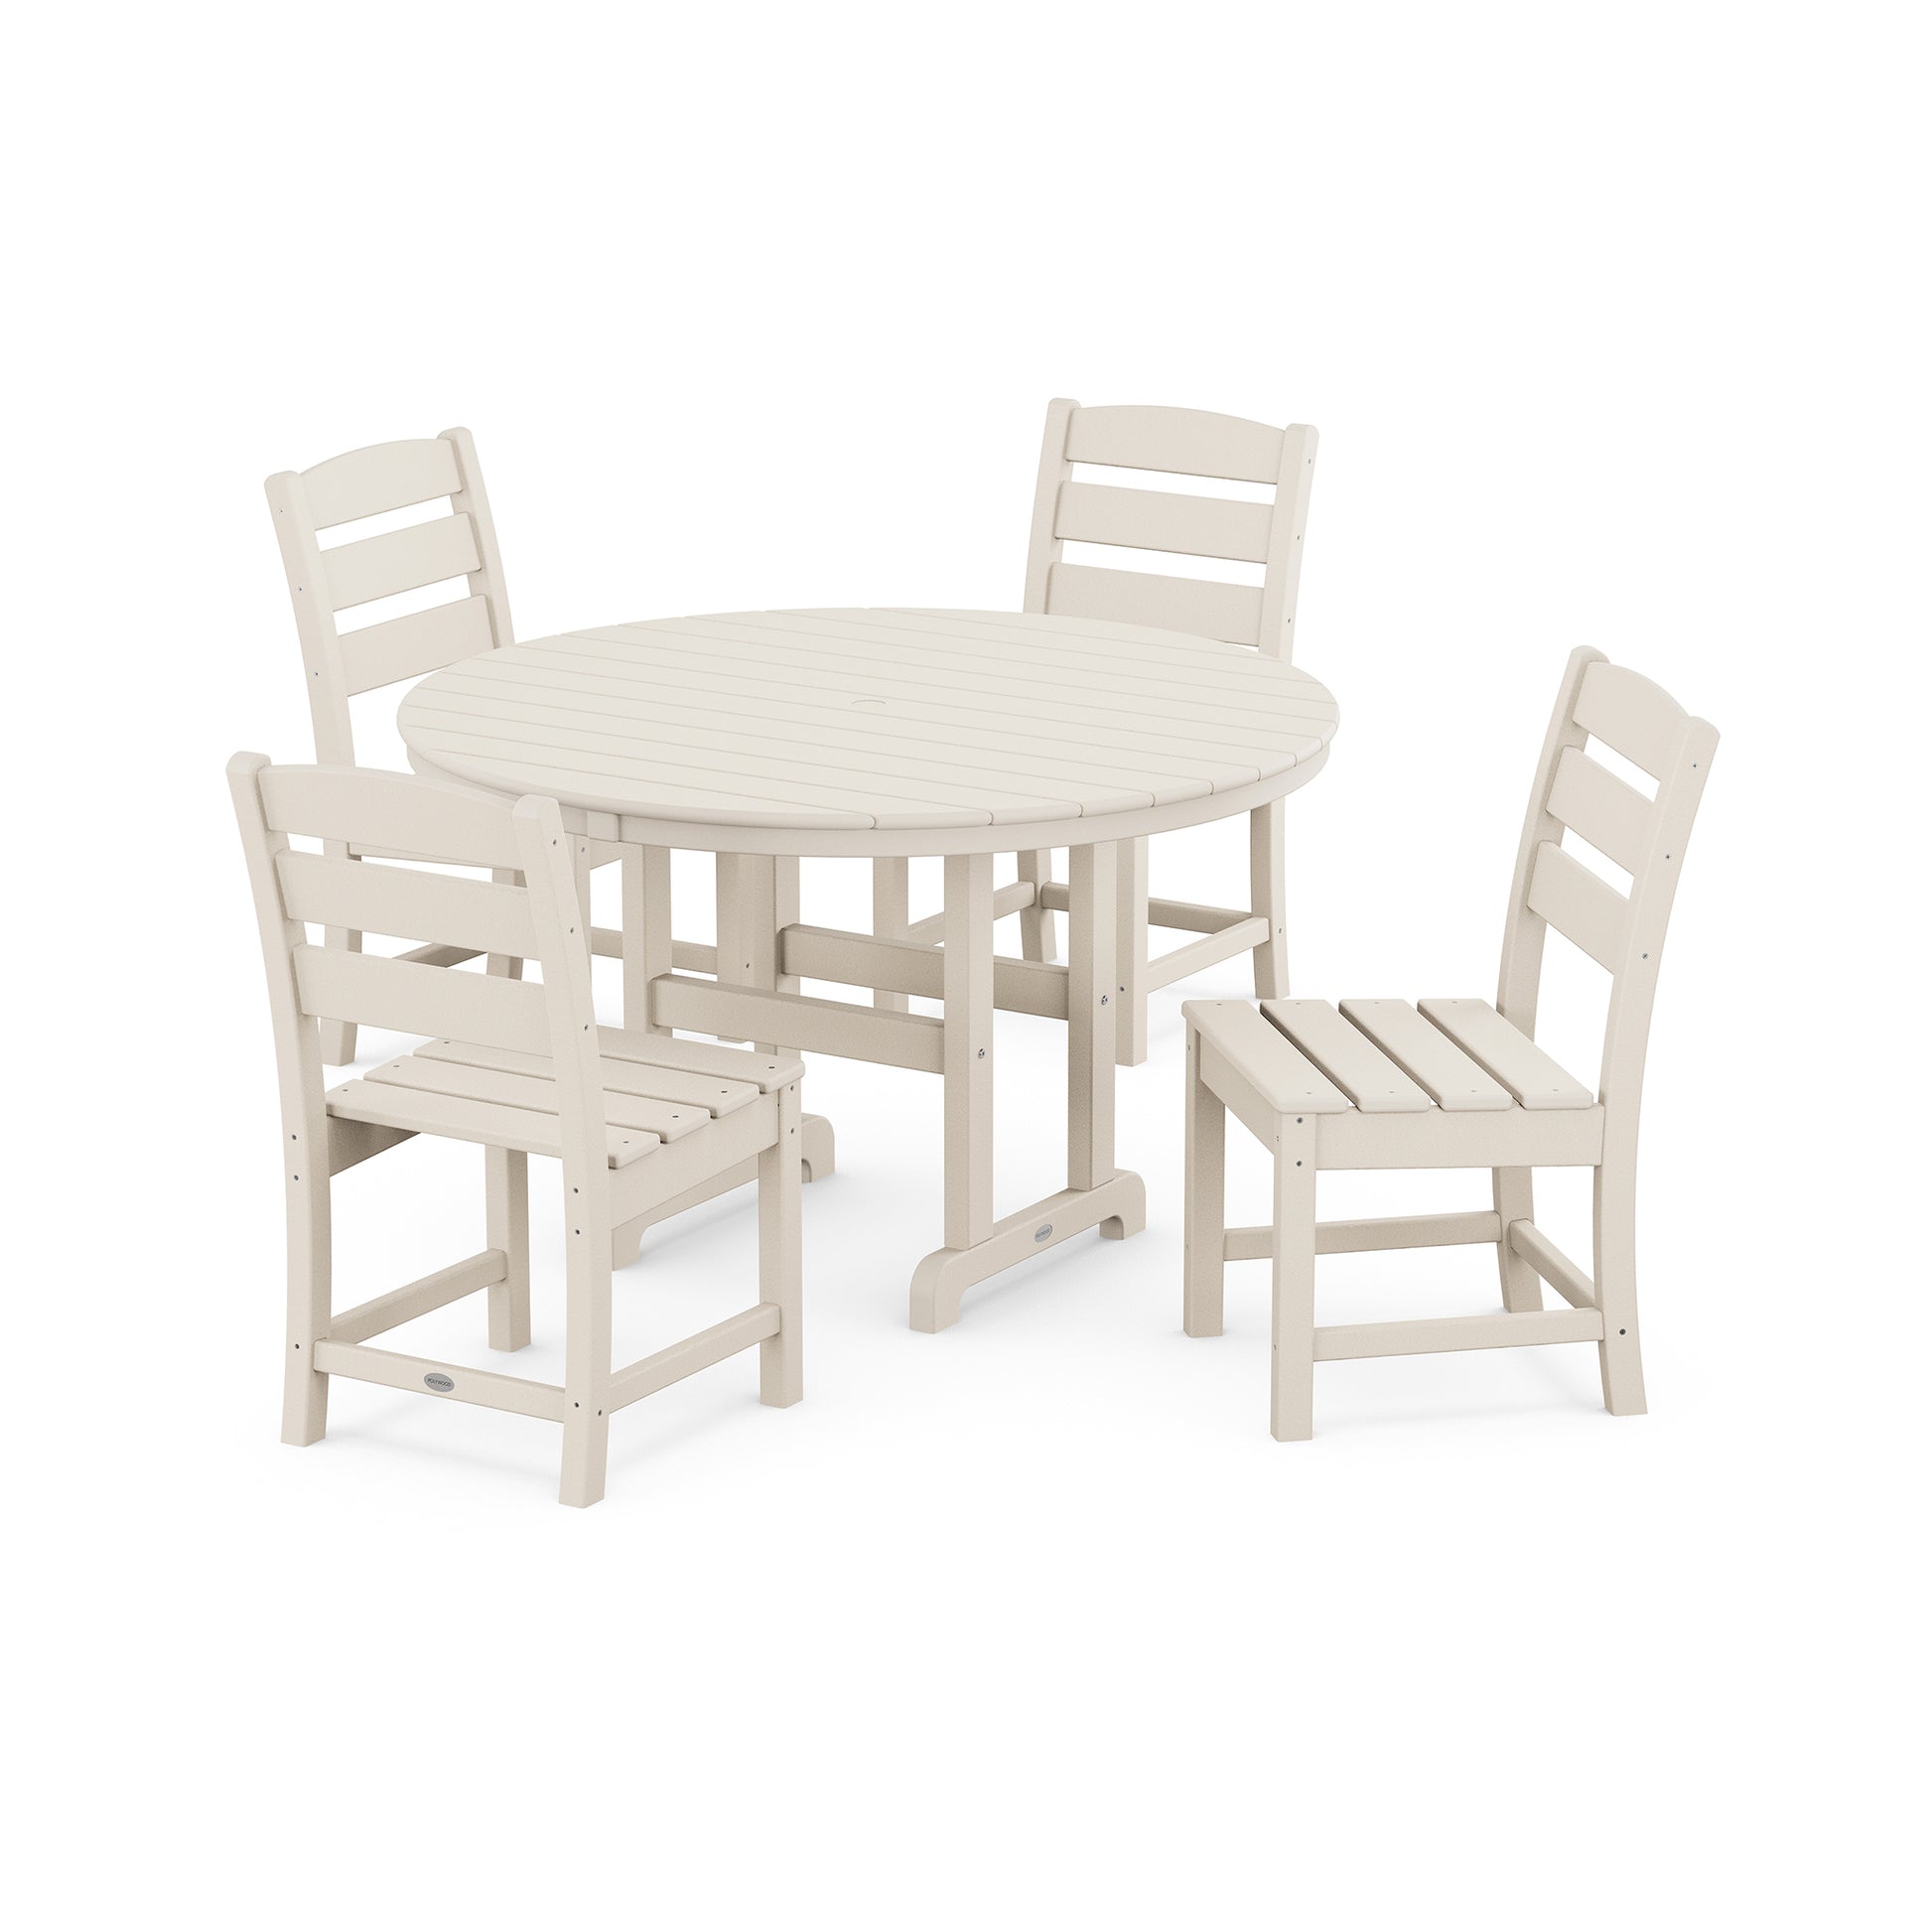 A POLYWOOD Lakeside 5-Piece Round Side Chair Dining Set with a round, white table and three matching chairs, crafted from weather-resistant POLYWOOD®. They are arranged on a plain white background, showcasing their durability and stylish design.